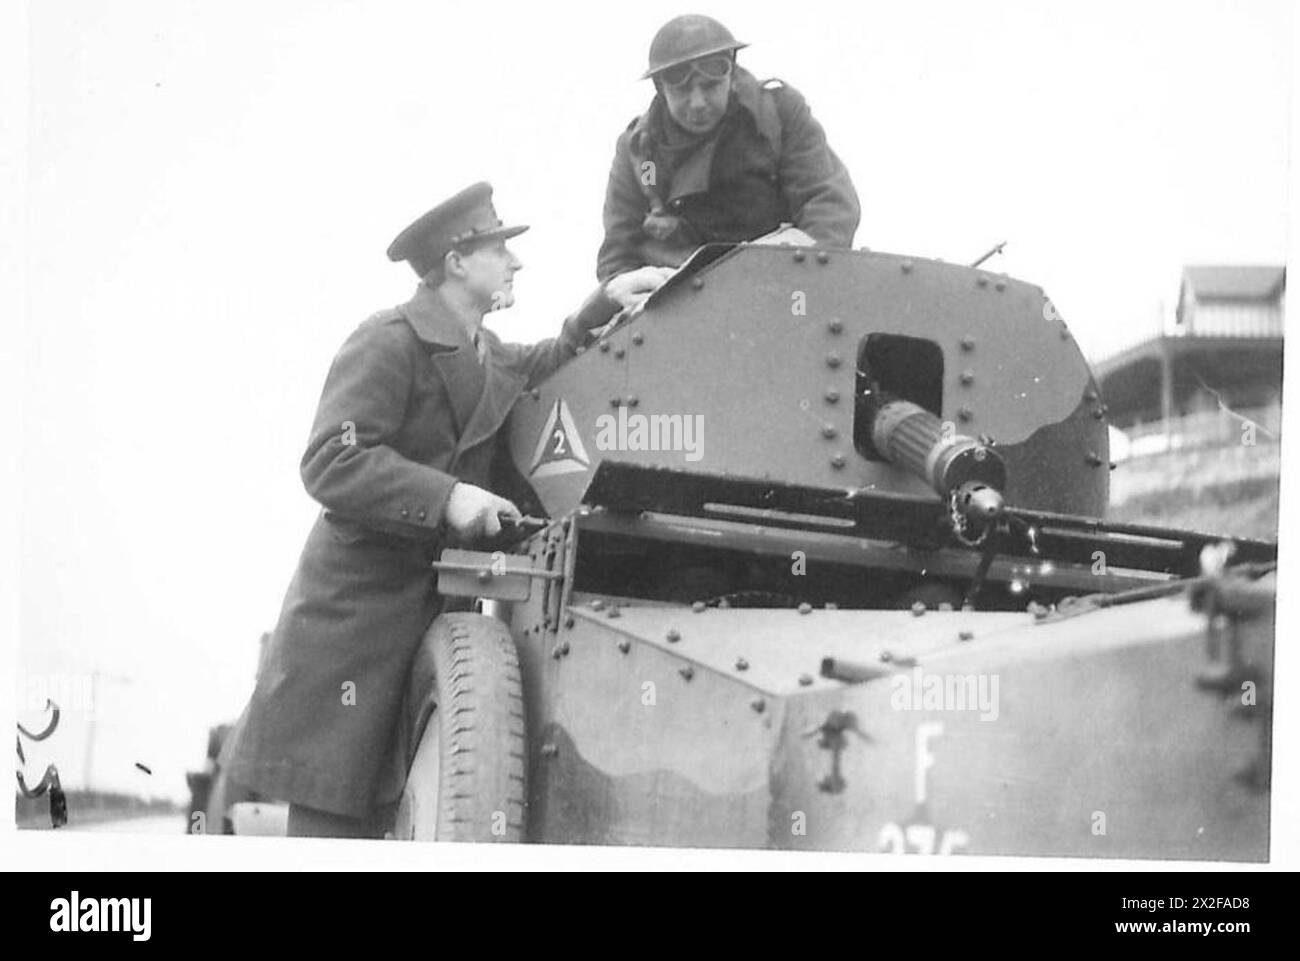 BRITISH FORCES IN NORTHERN IRELAND - Major Lord O'Neill giving instructions to one of the crew of an armoured car. The Unit is the North Irish Horse British Army Stock Photo